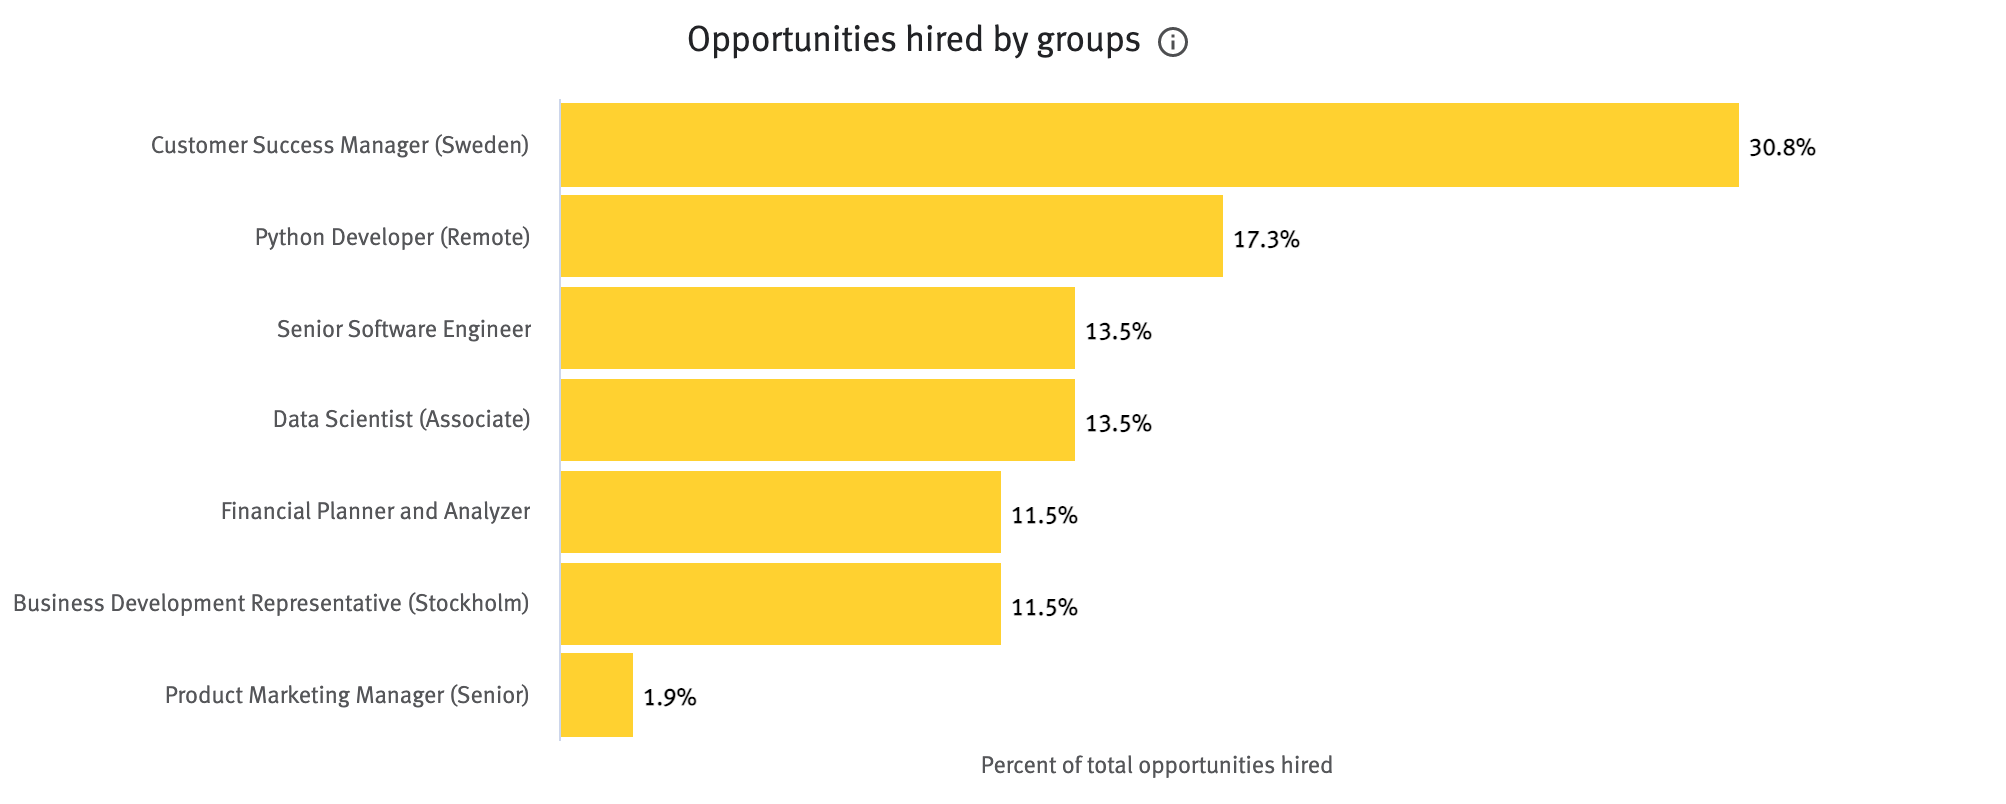 Opportunities hired by groups chart